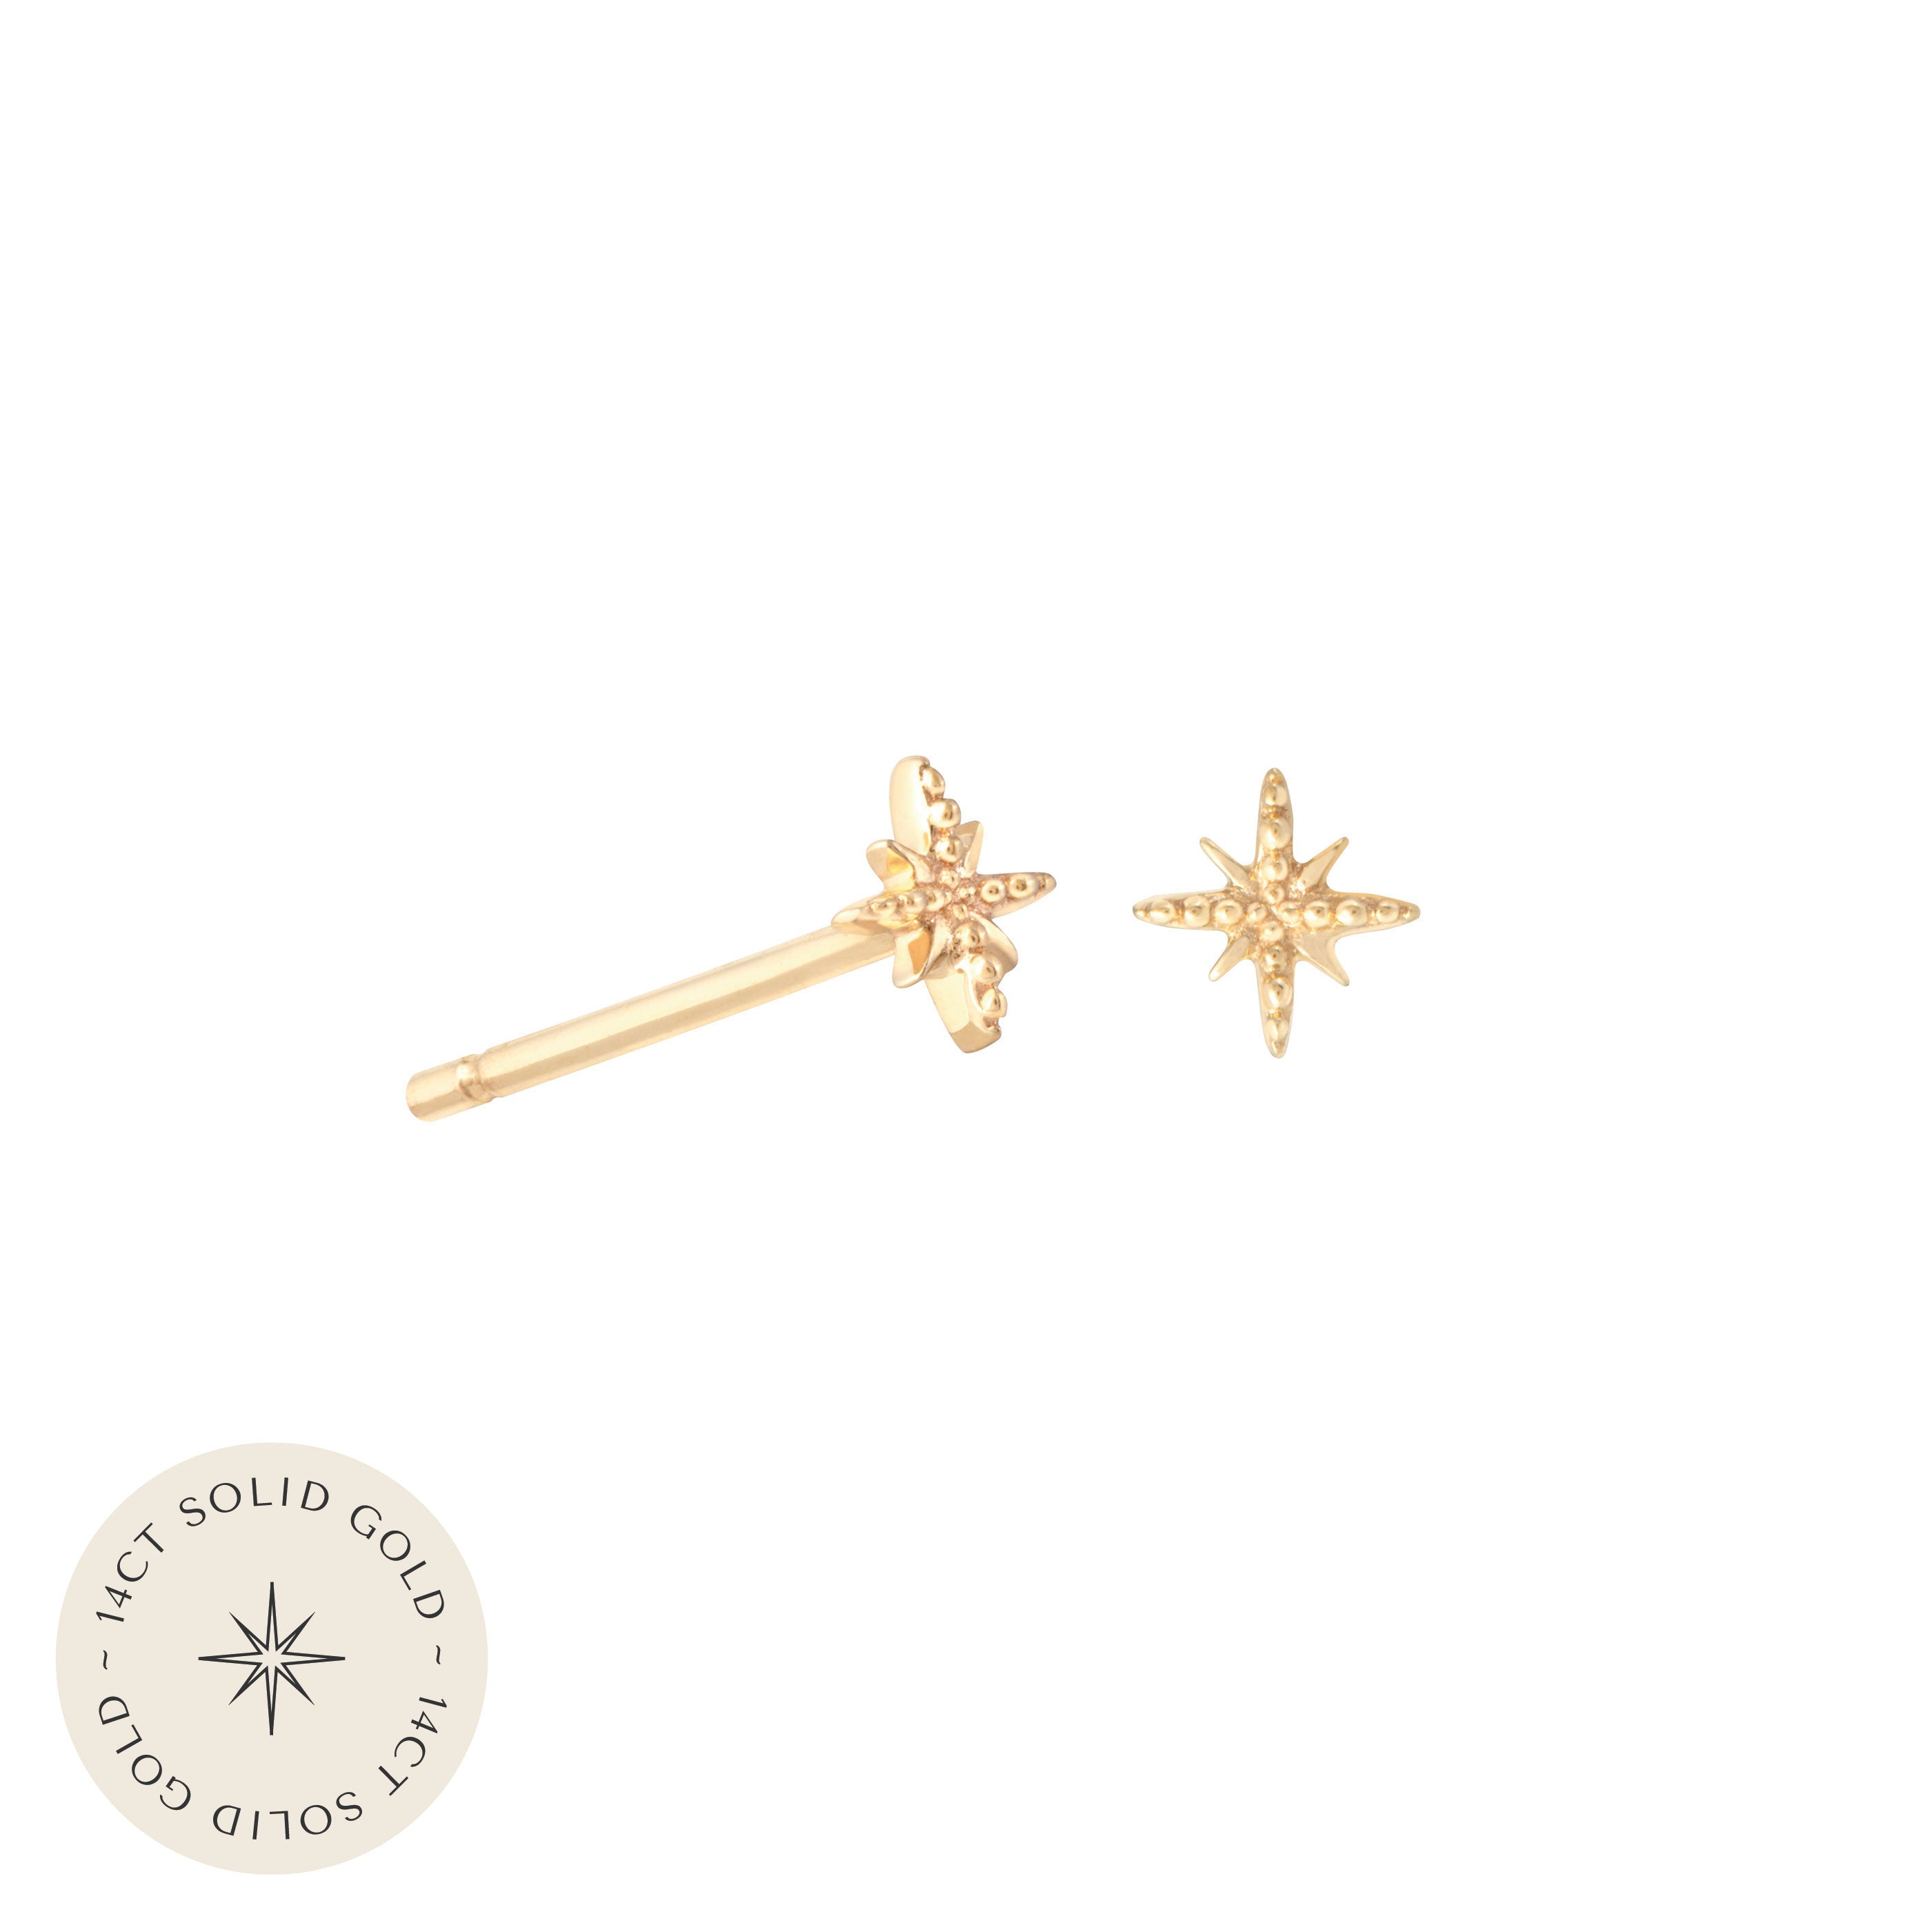 Twilight Stud Earrings in Solid Gold with 14CT solid gold label